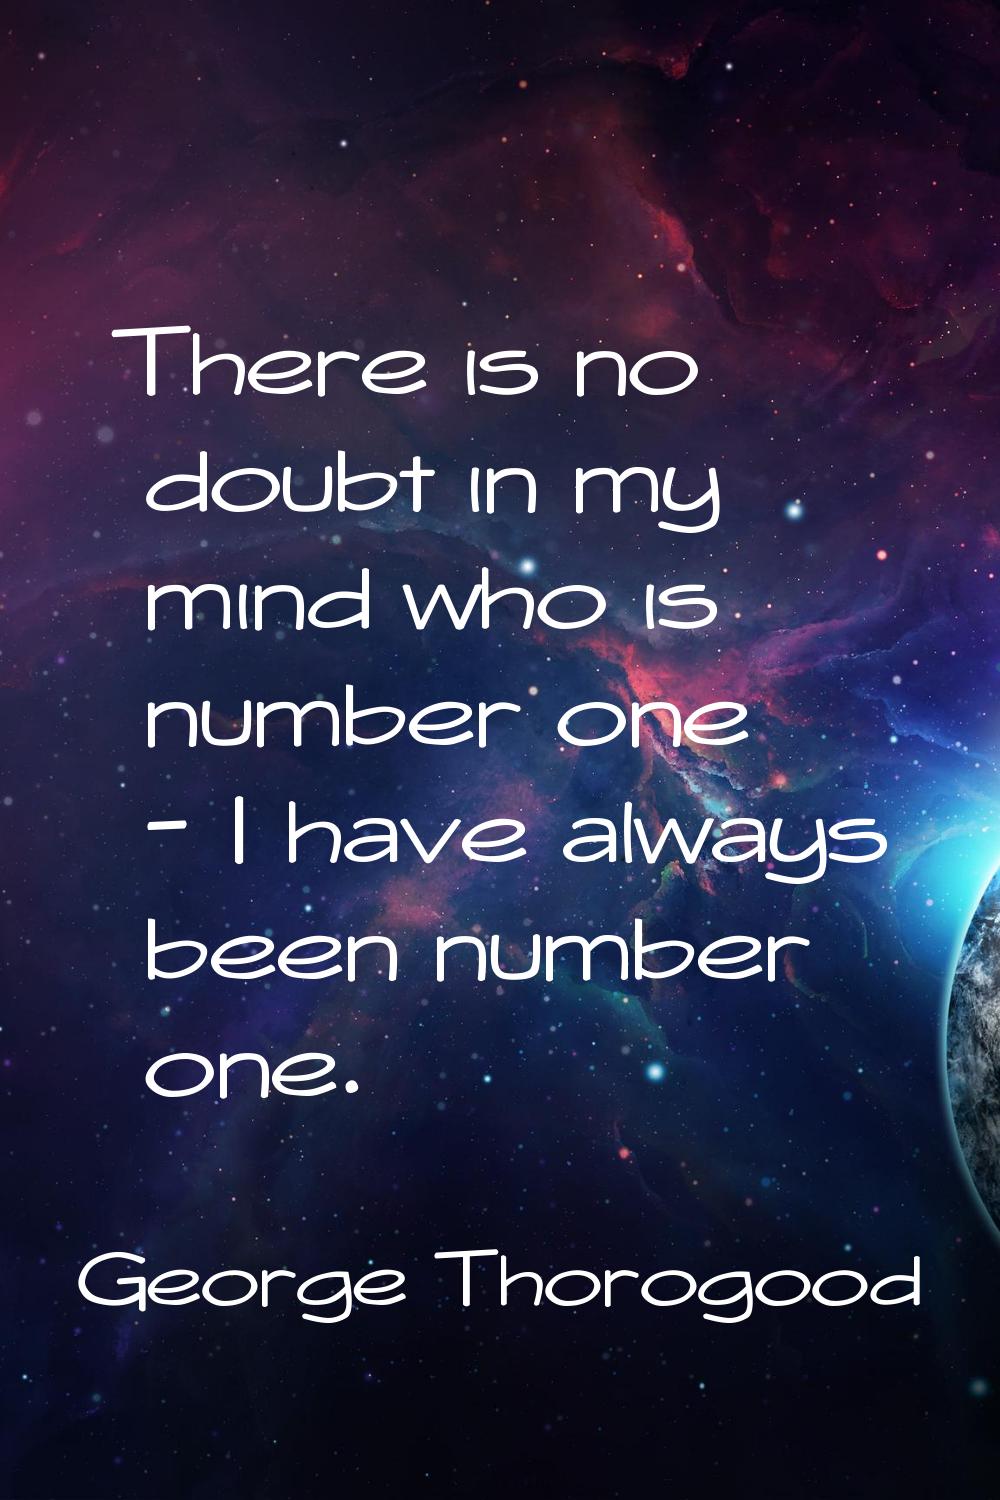 There is no doubt in my mind who is number one - I have always been number one.